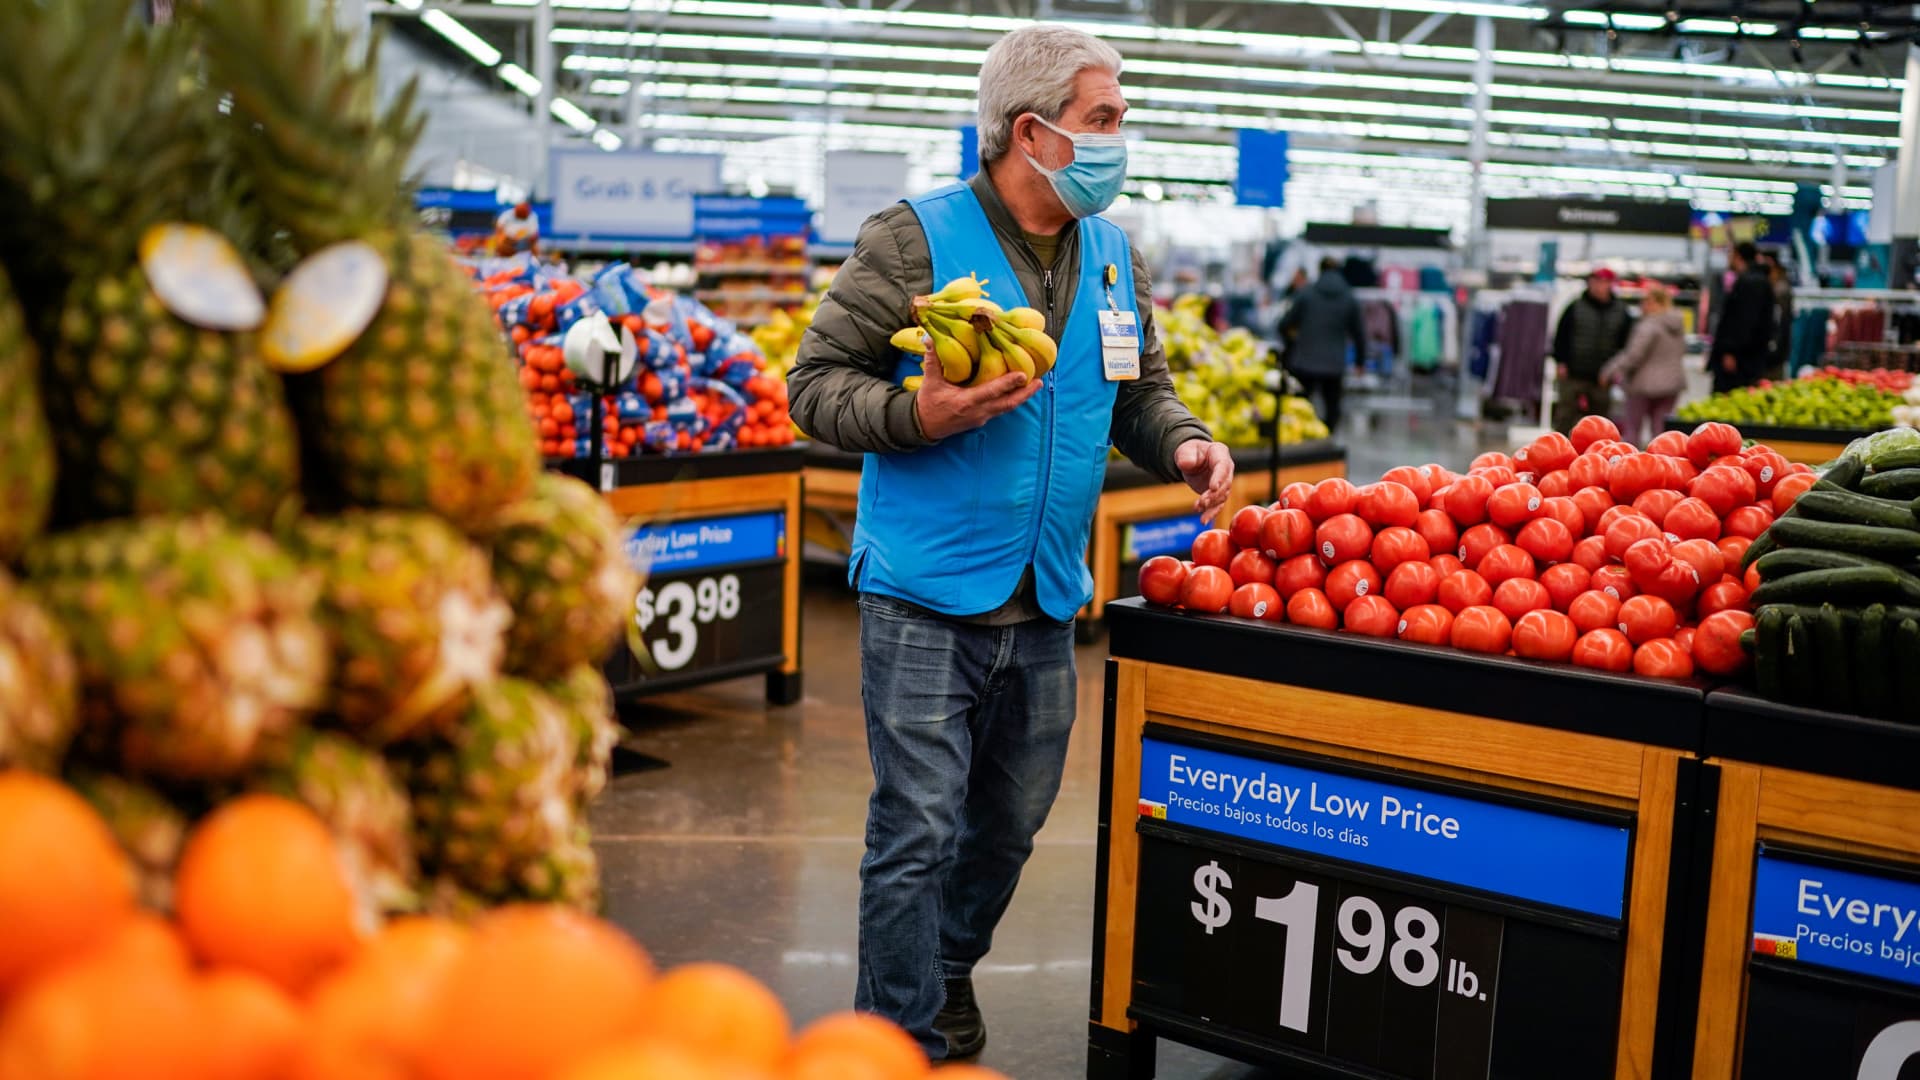 Shrinking food stamp benefits for families mean yet another challenge for retailers - CNBC